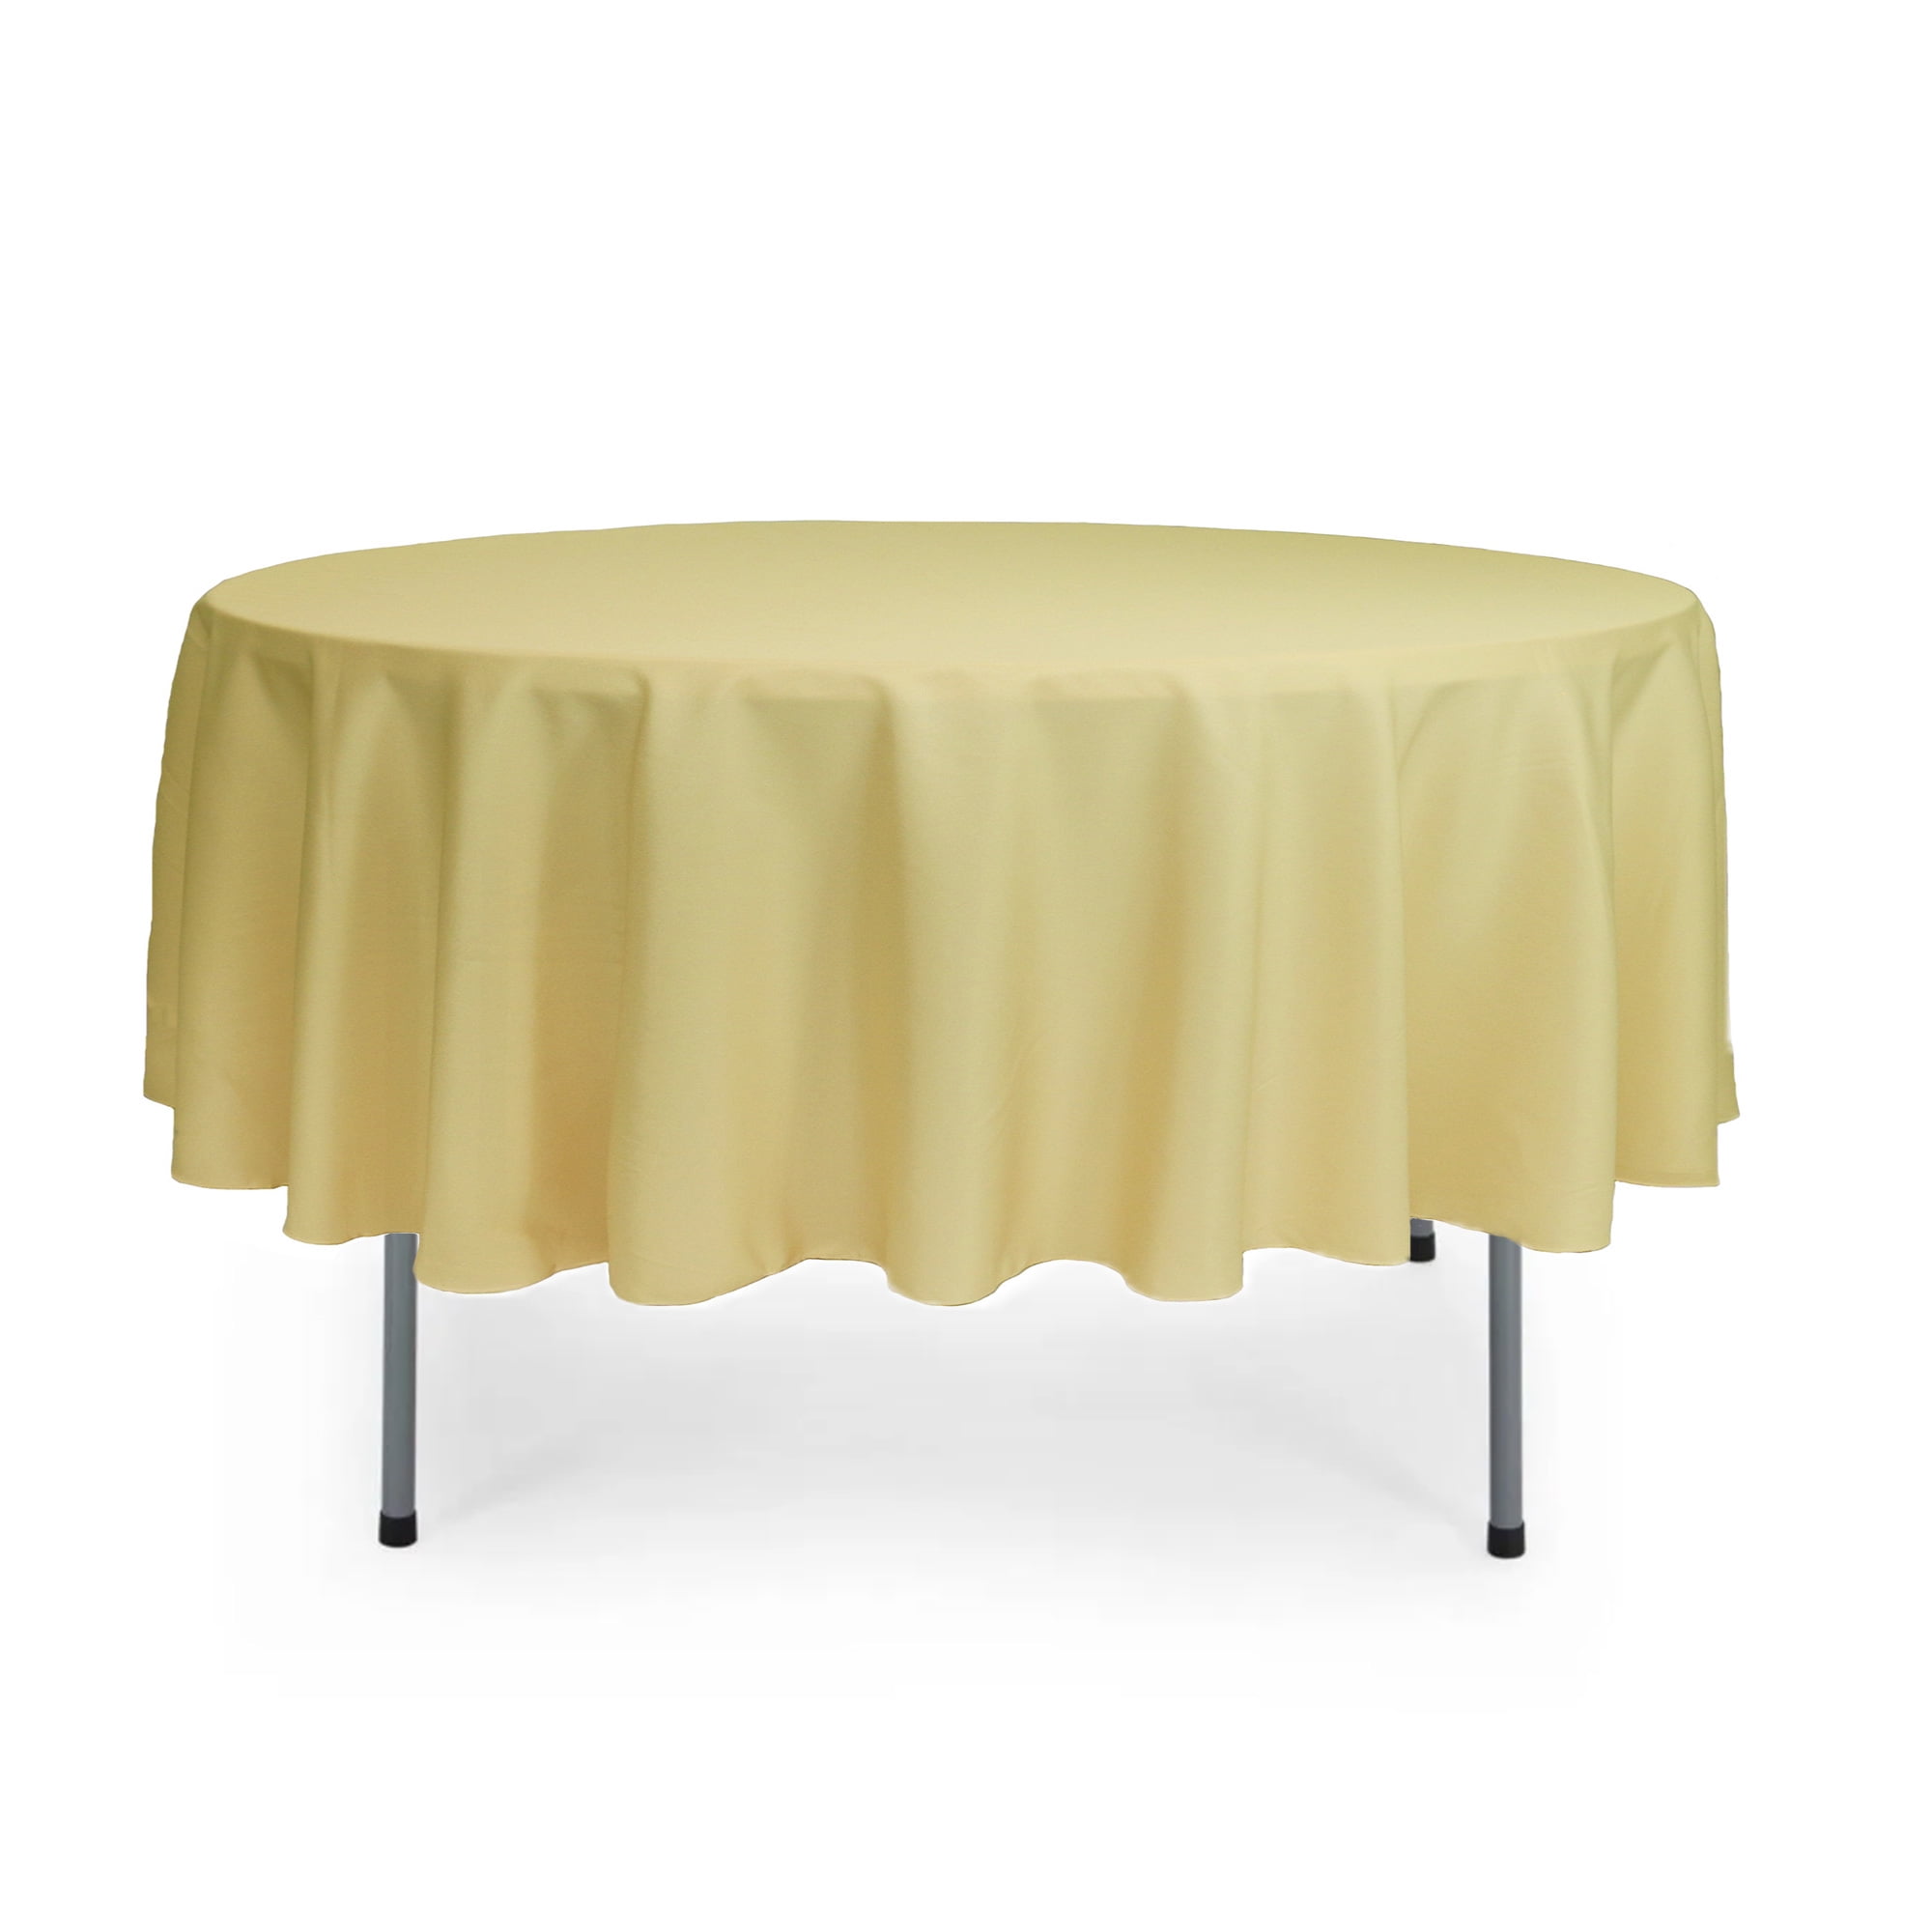 90 Inch Round Polyester Tablecloth, How Big Is A 90 Inch Round Tablecloths